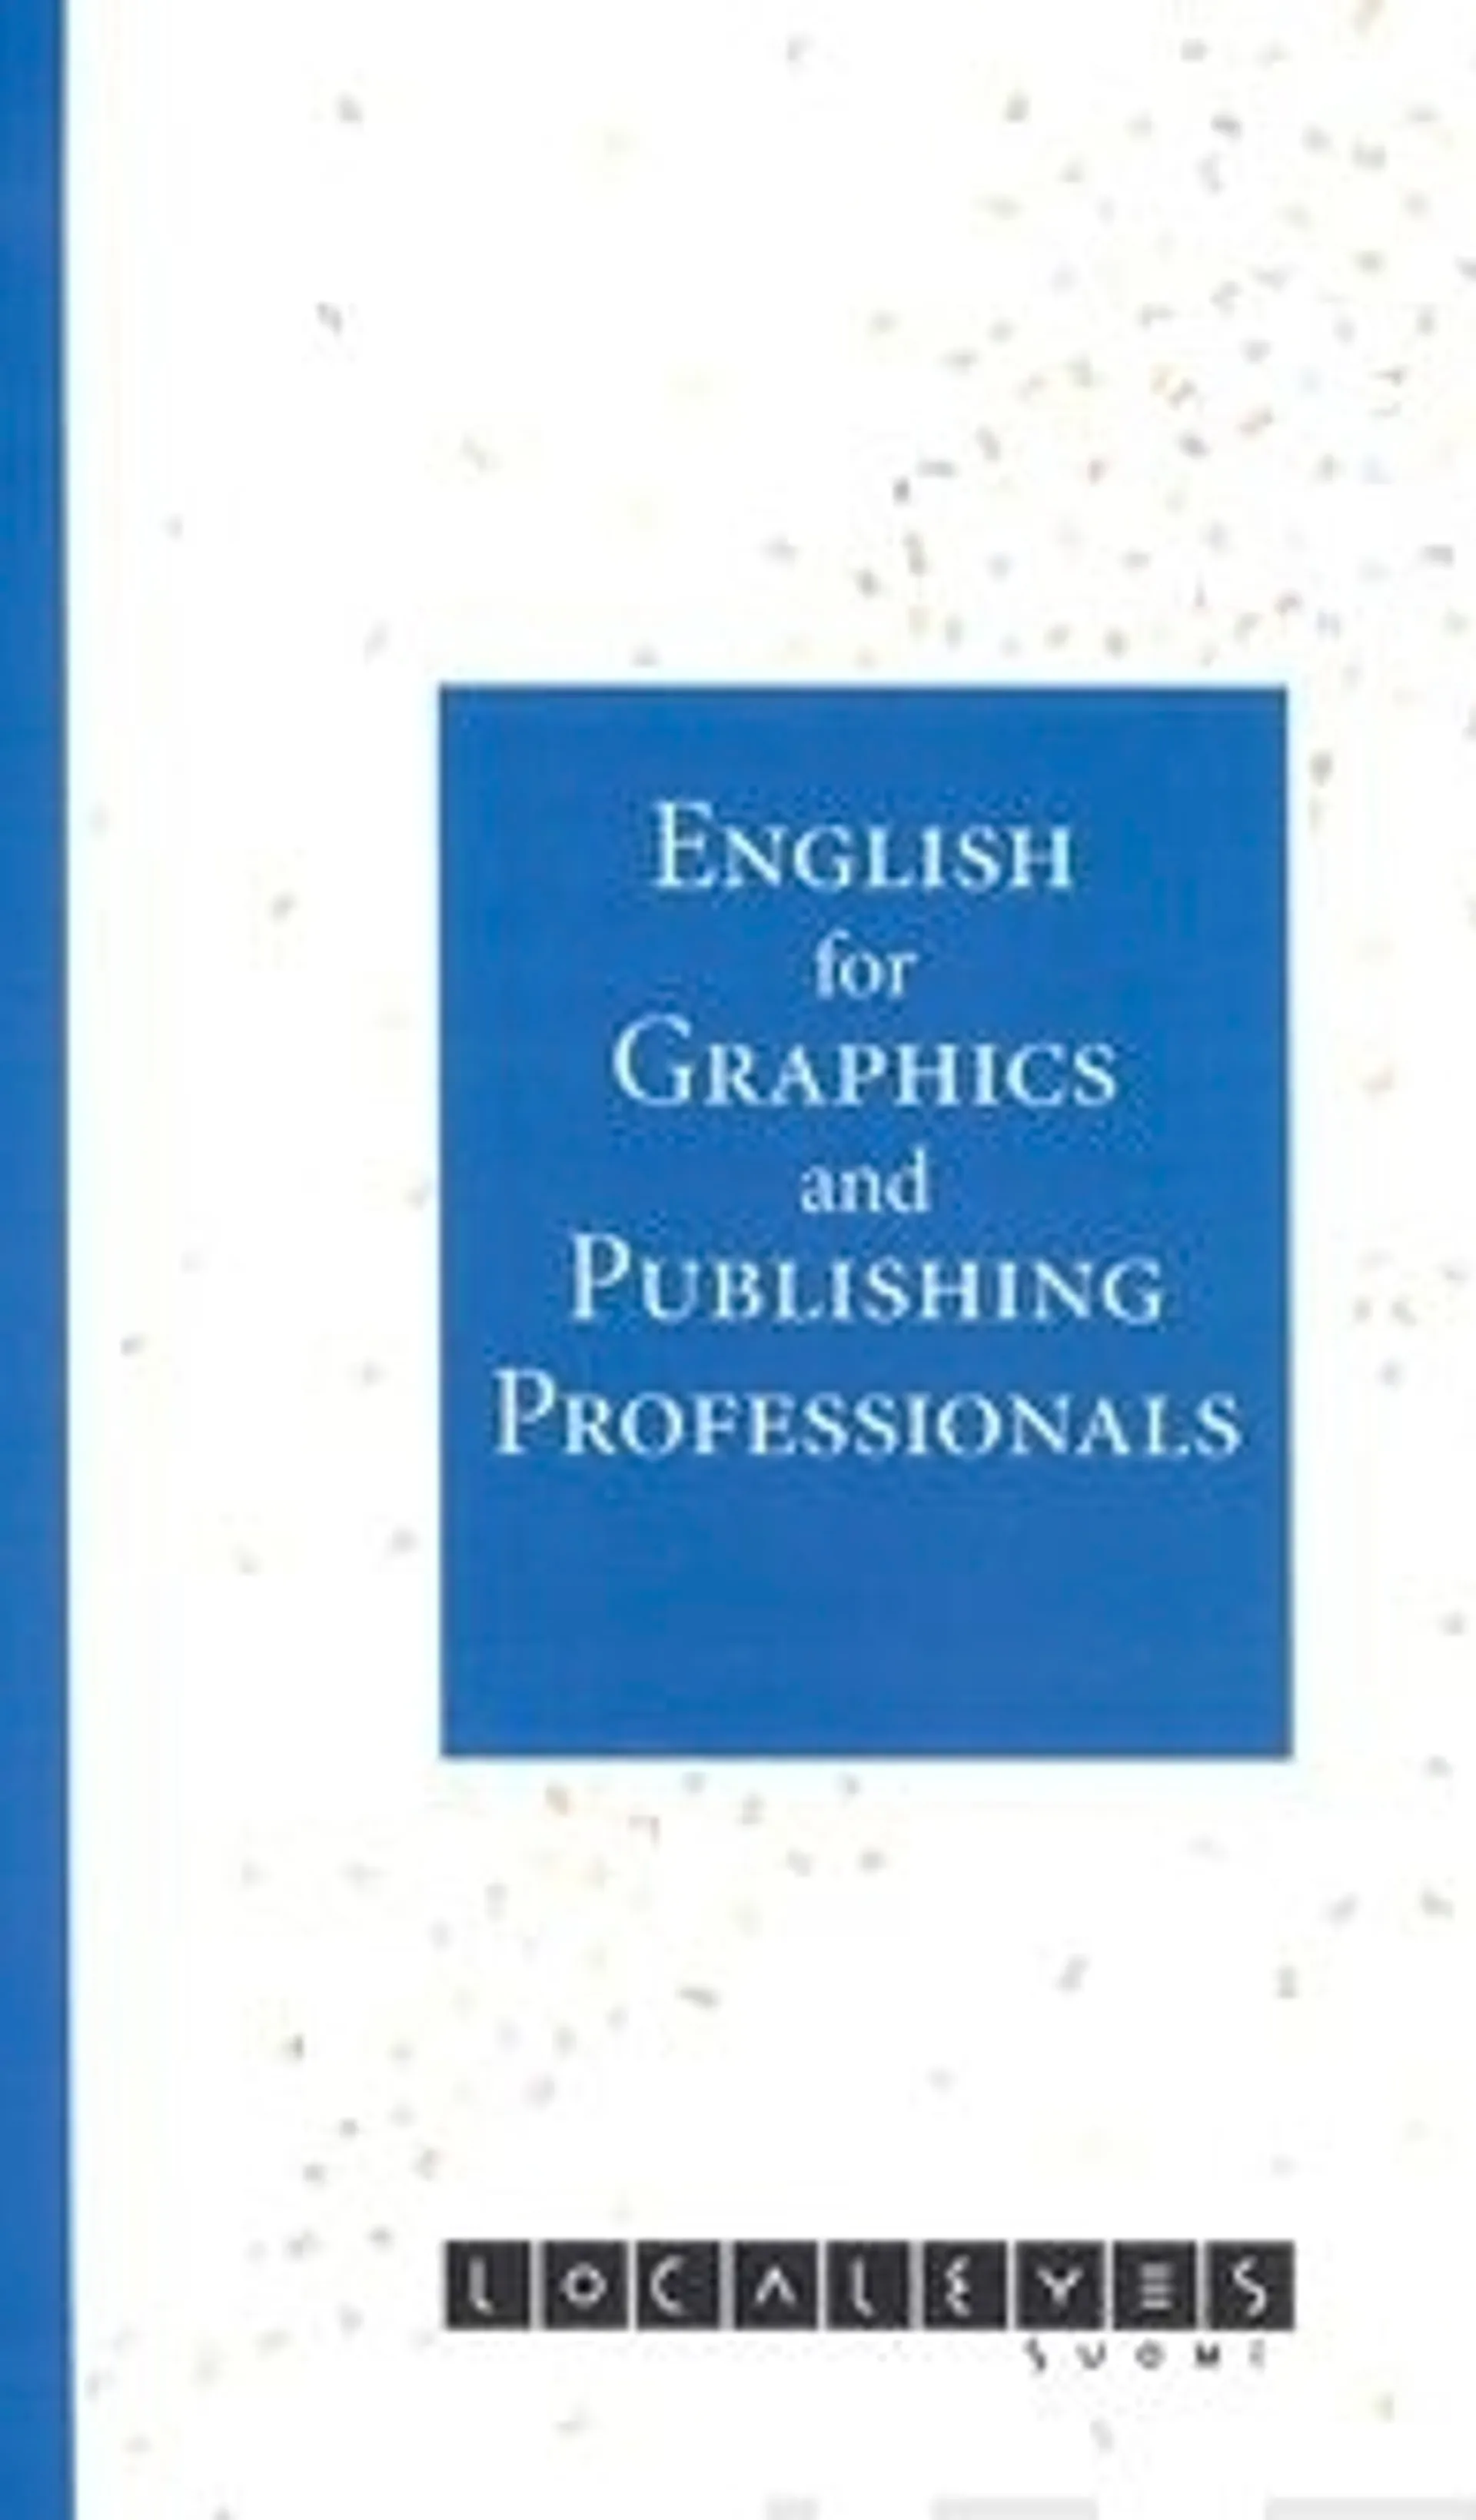 English for graphics and publishing professionals